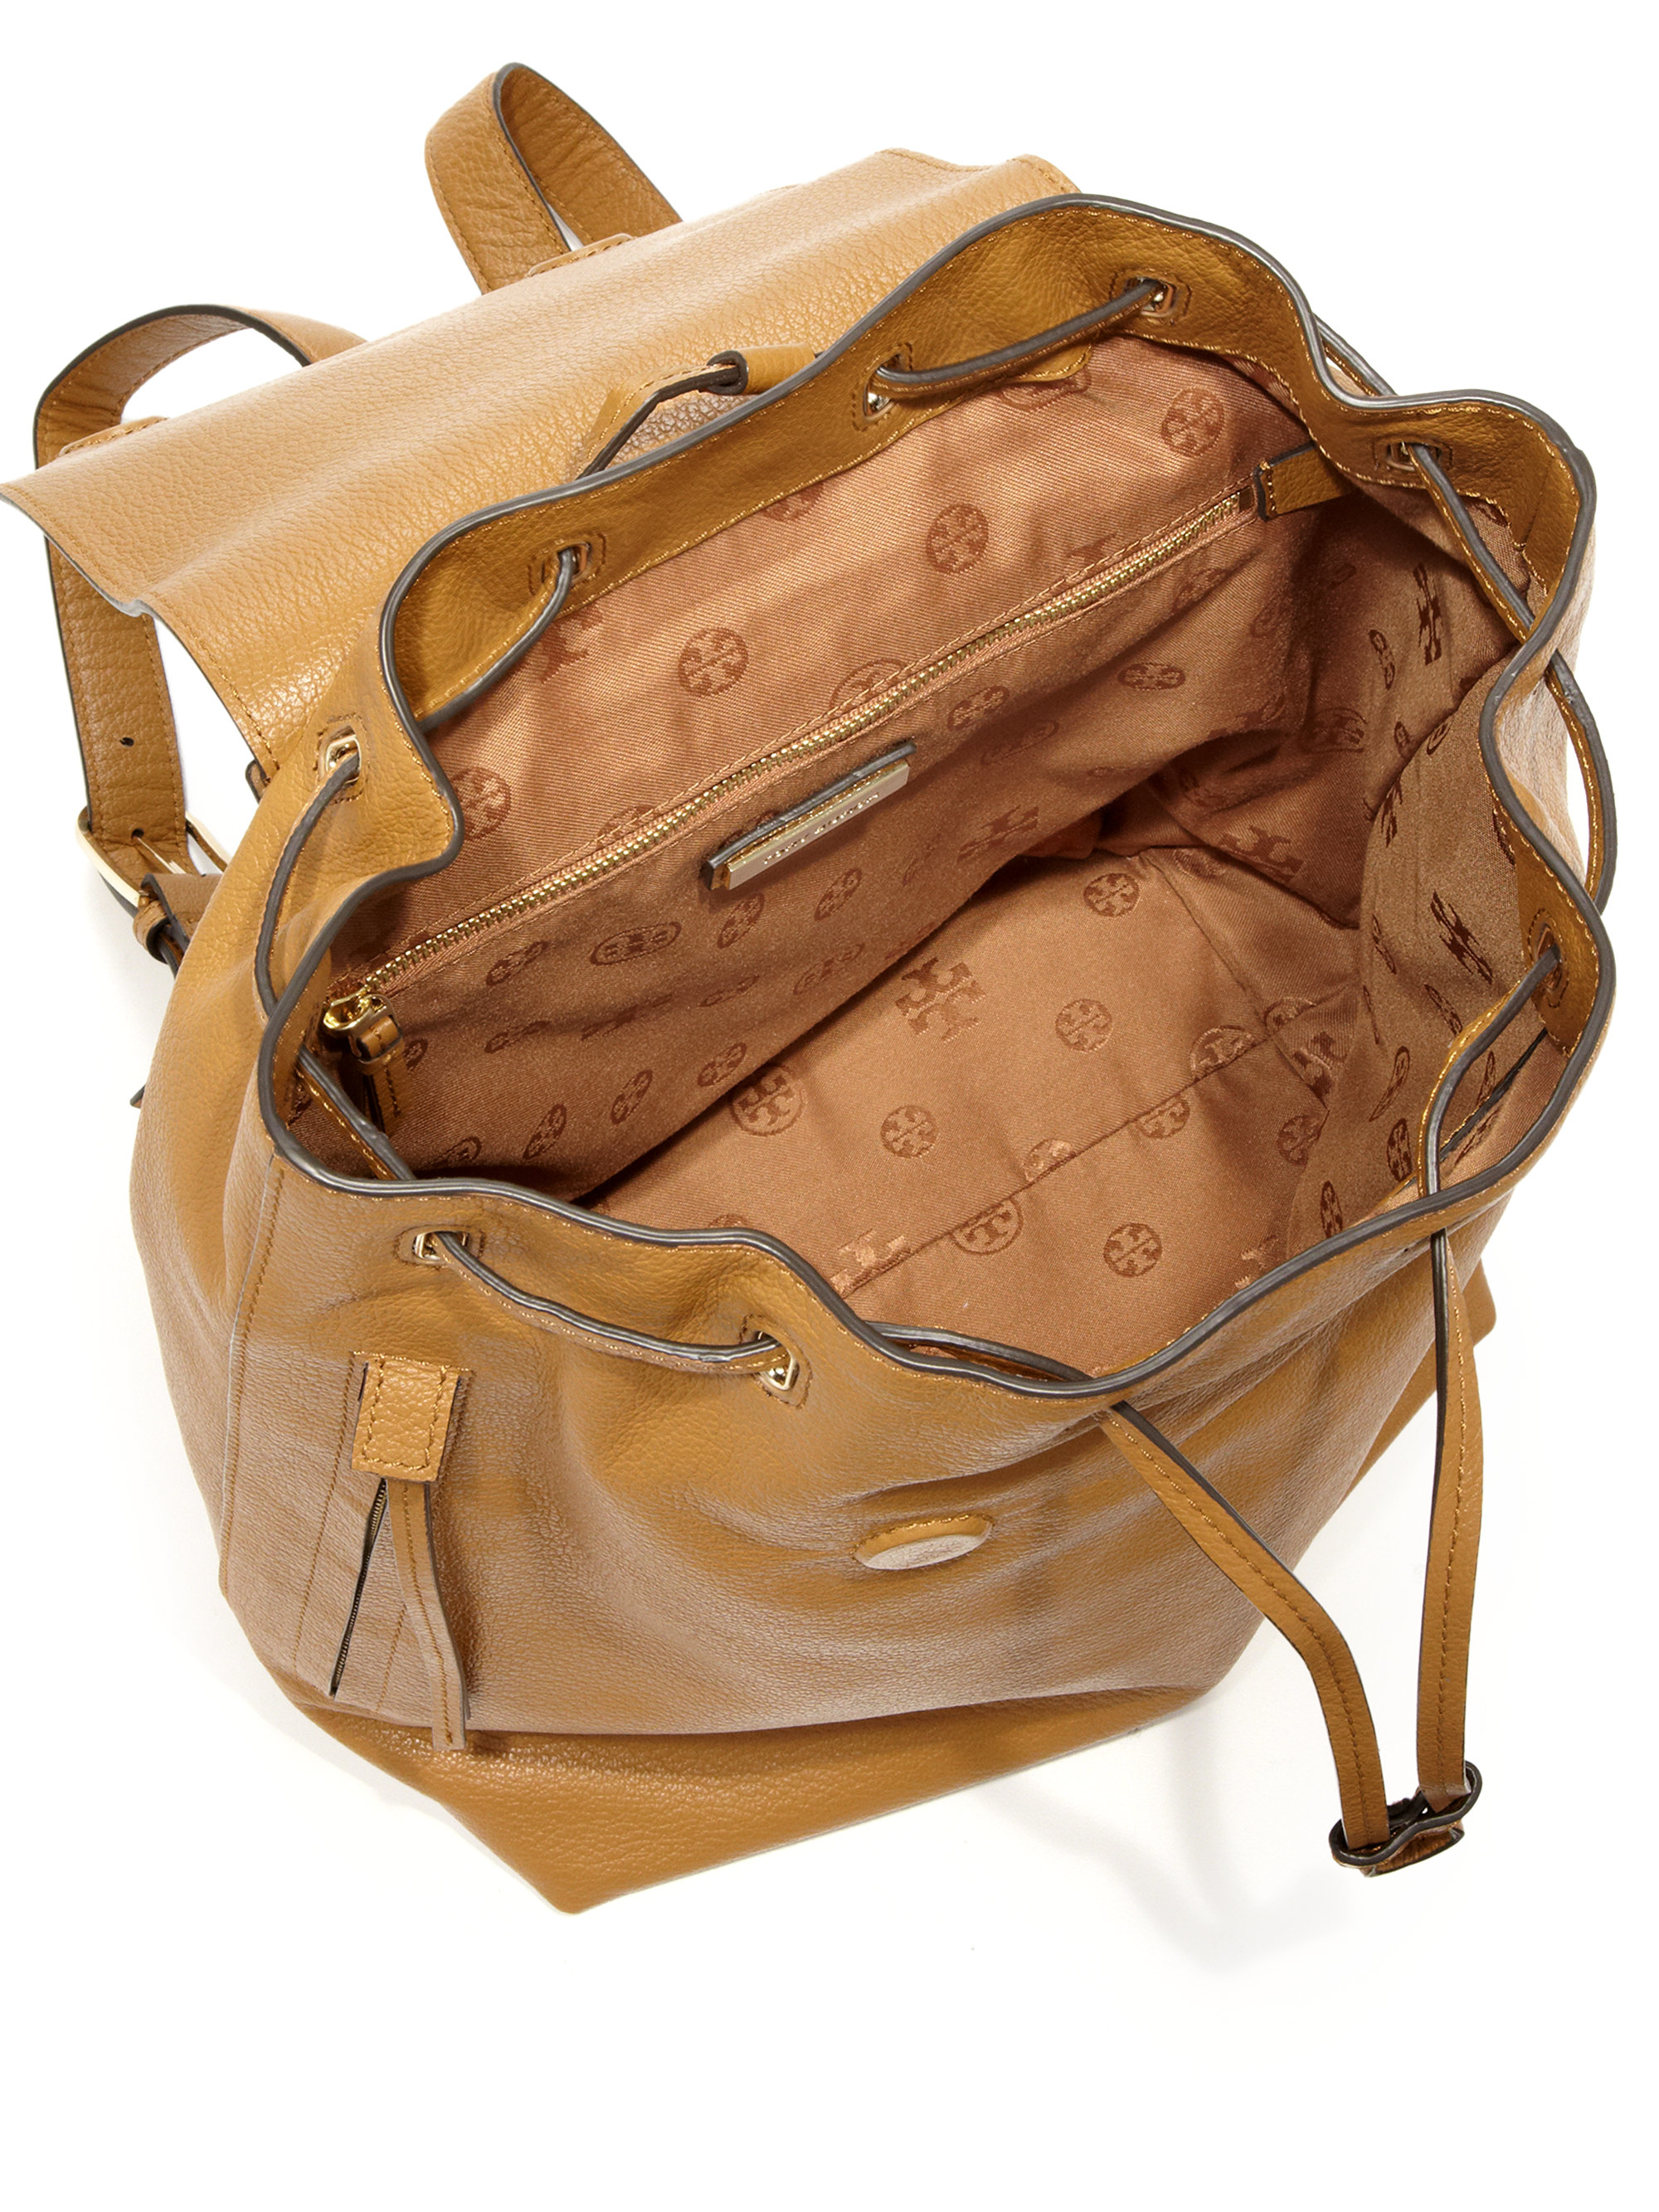 Tory Burch Brody Leather Backpack in Natural | Lyst